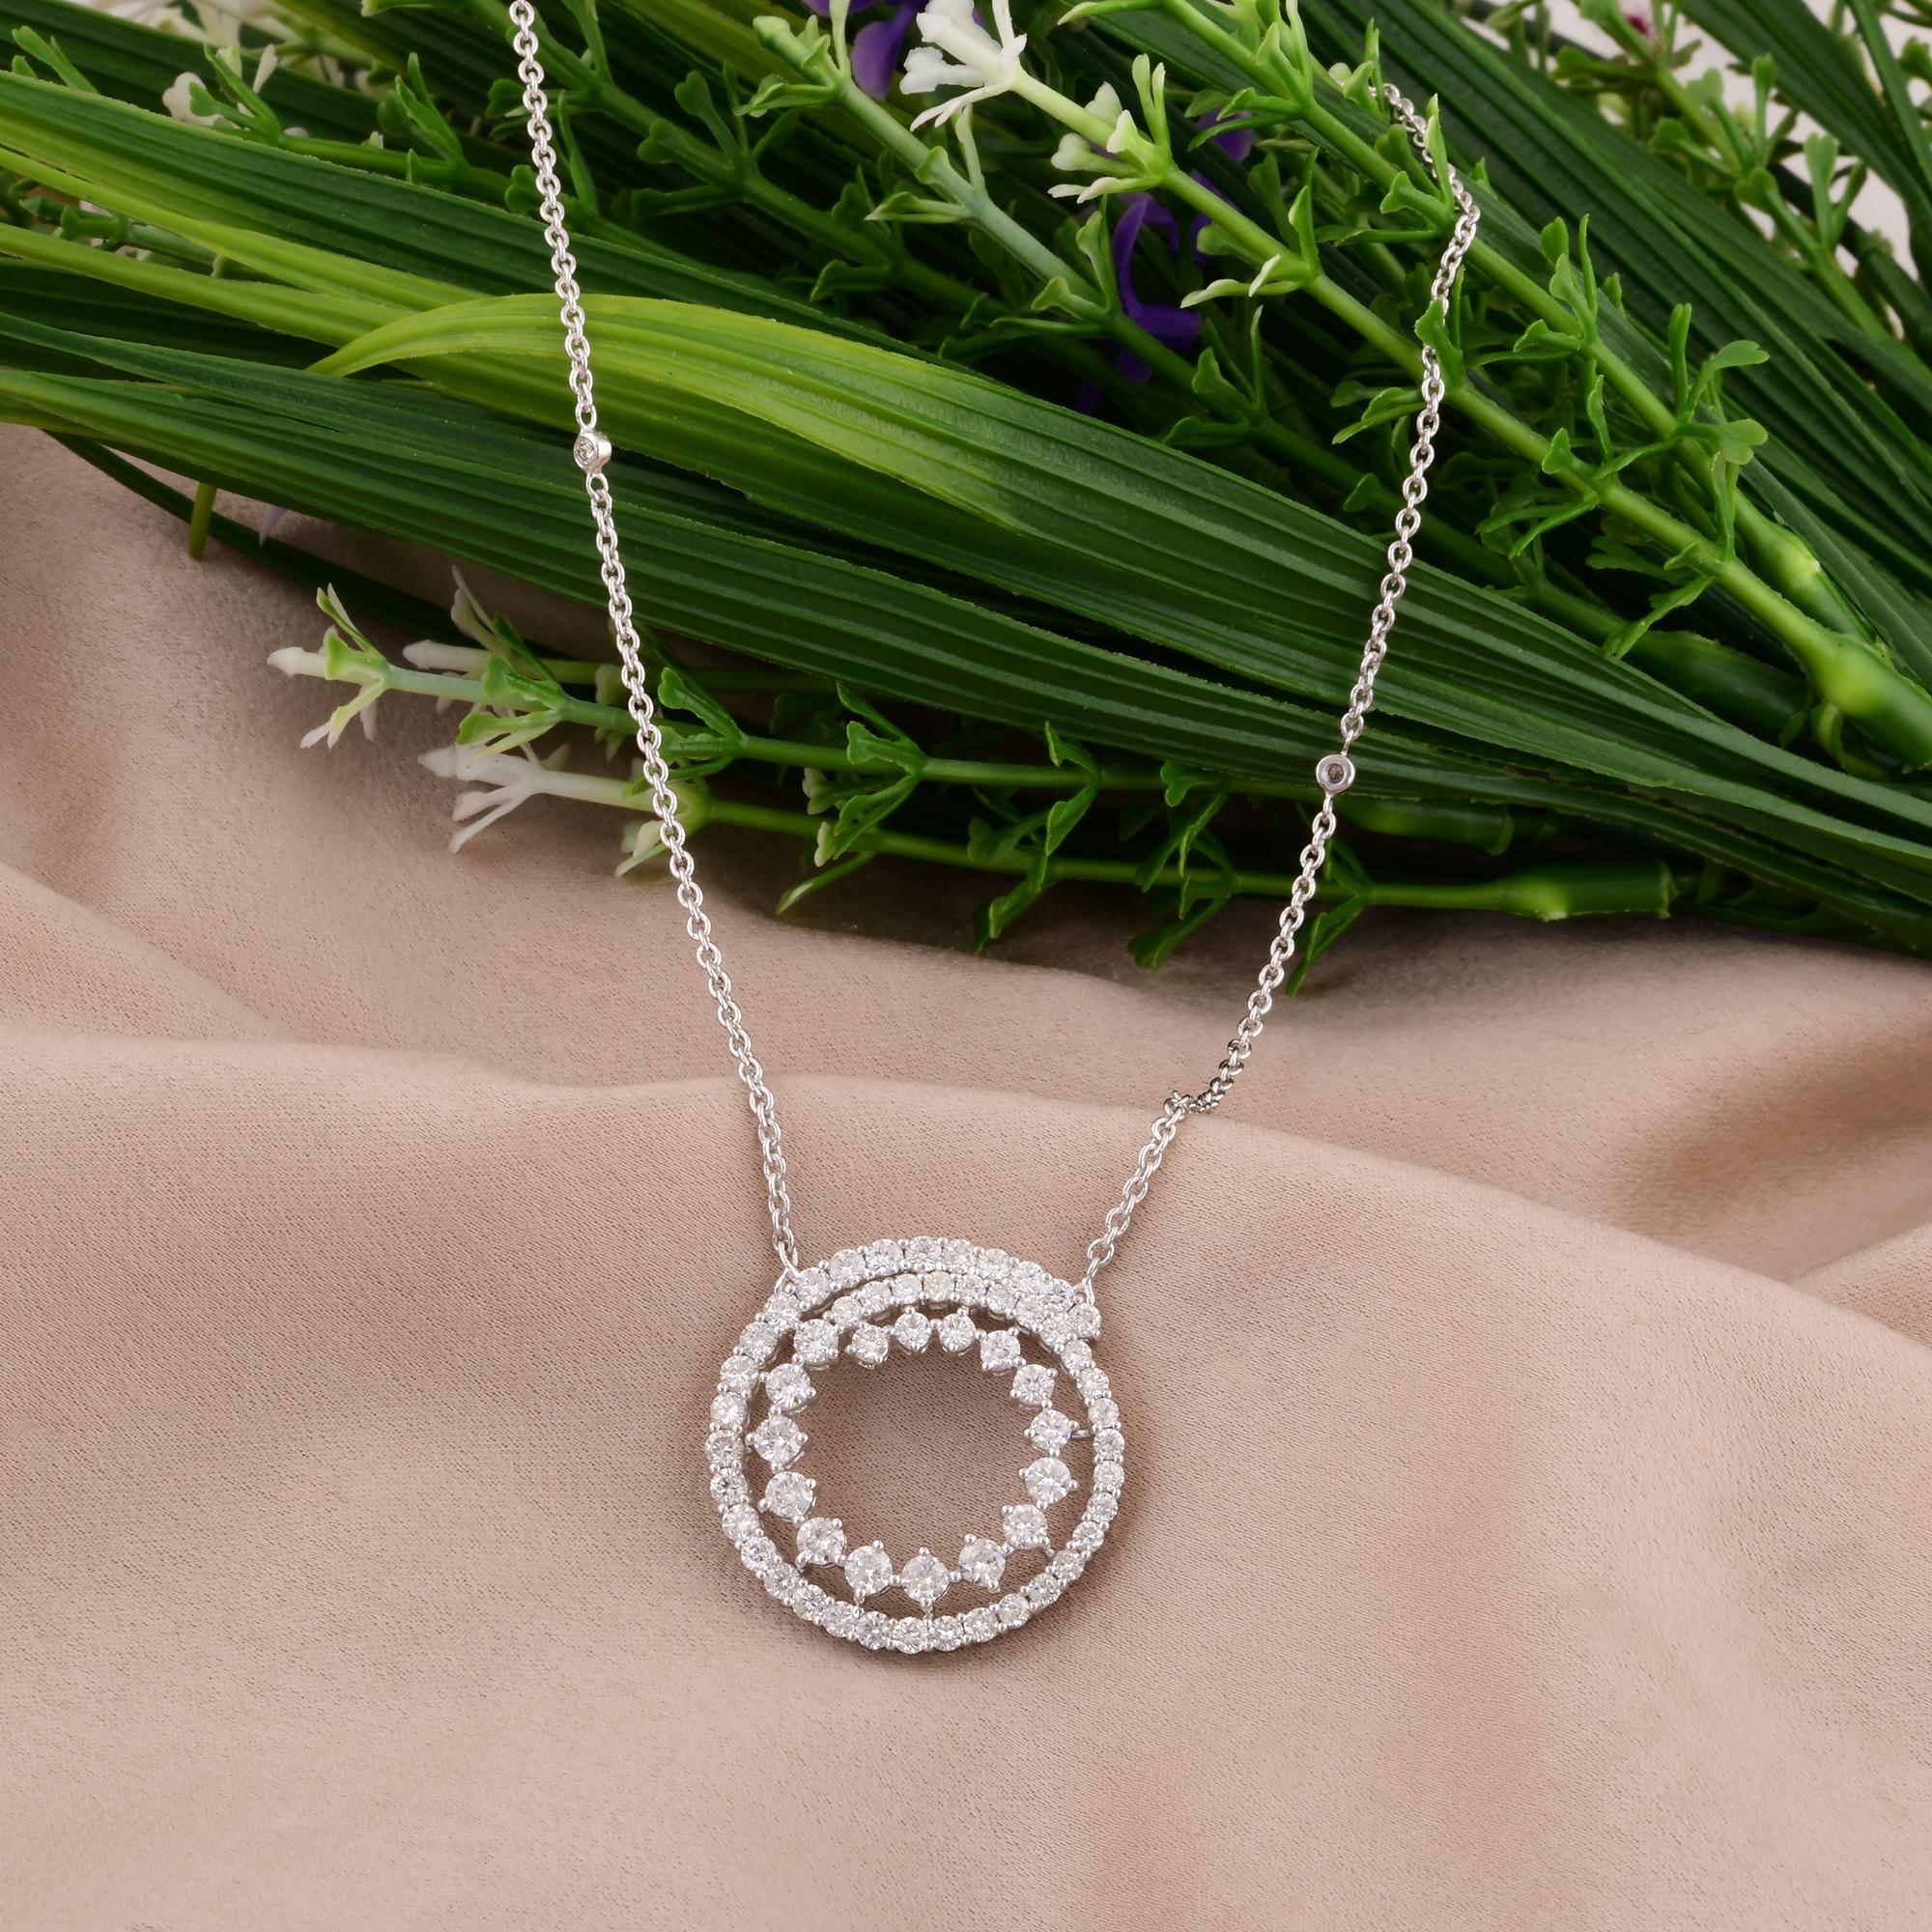 The delicate 18 Karat White Gold chain gracefully enhances the luminosity of the diamond charm, creating a harmonious union of luxury and refinement. Expertly crafted with attention to detail, every aspect of this necklace exudes elegance and grace,